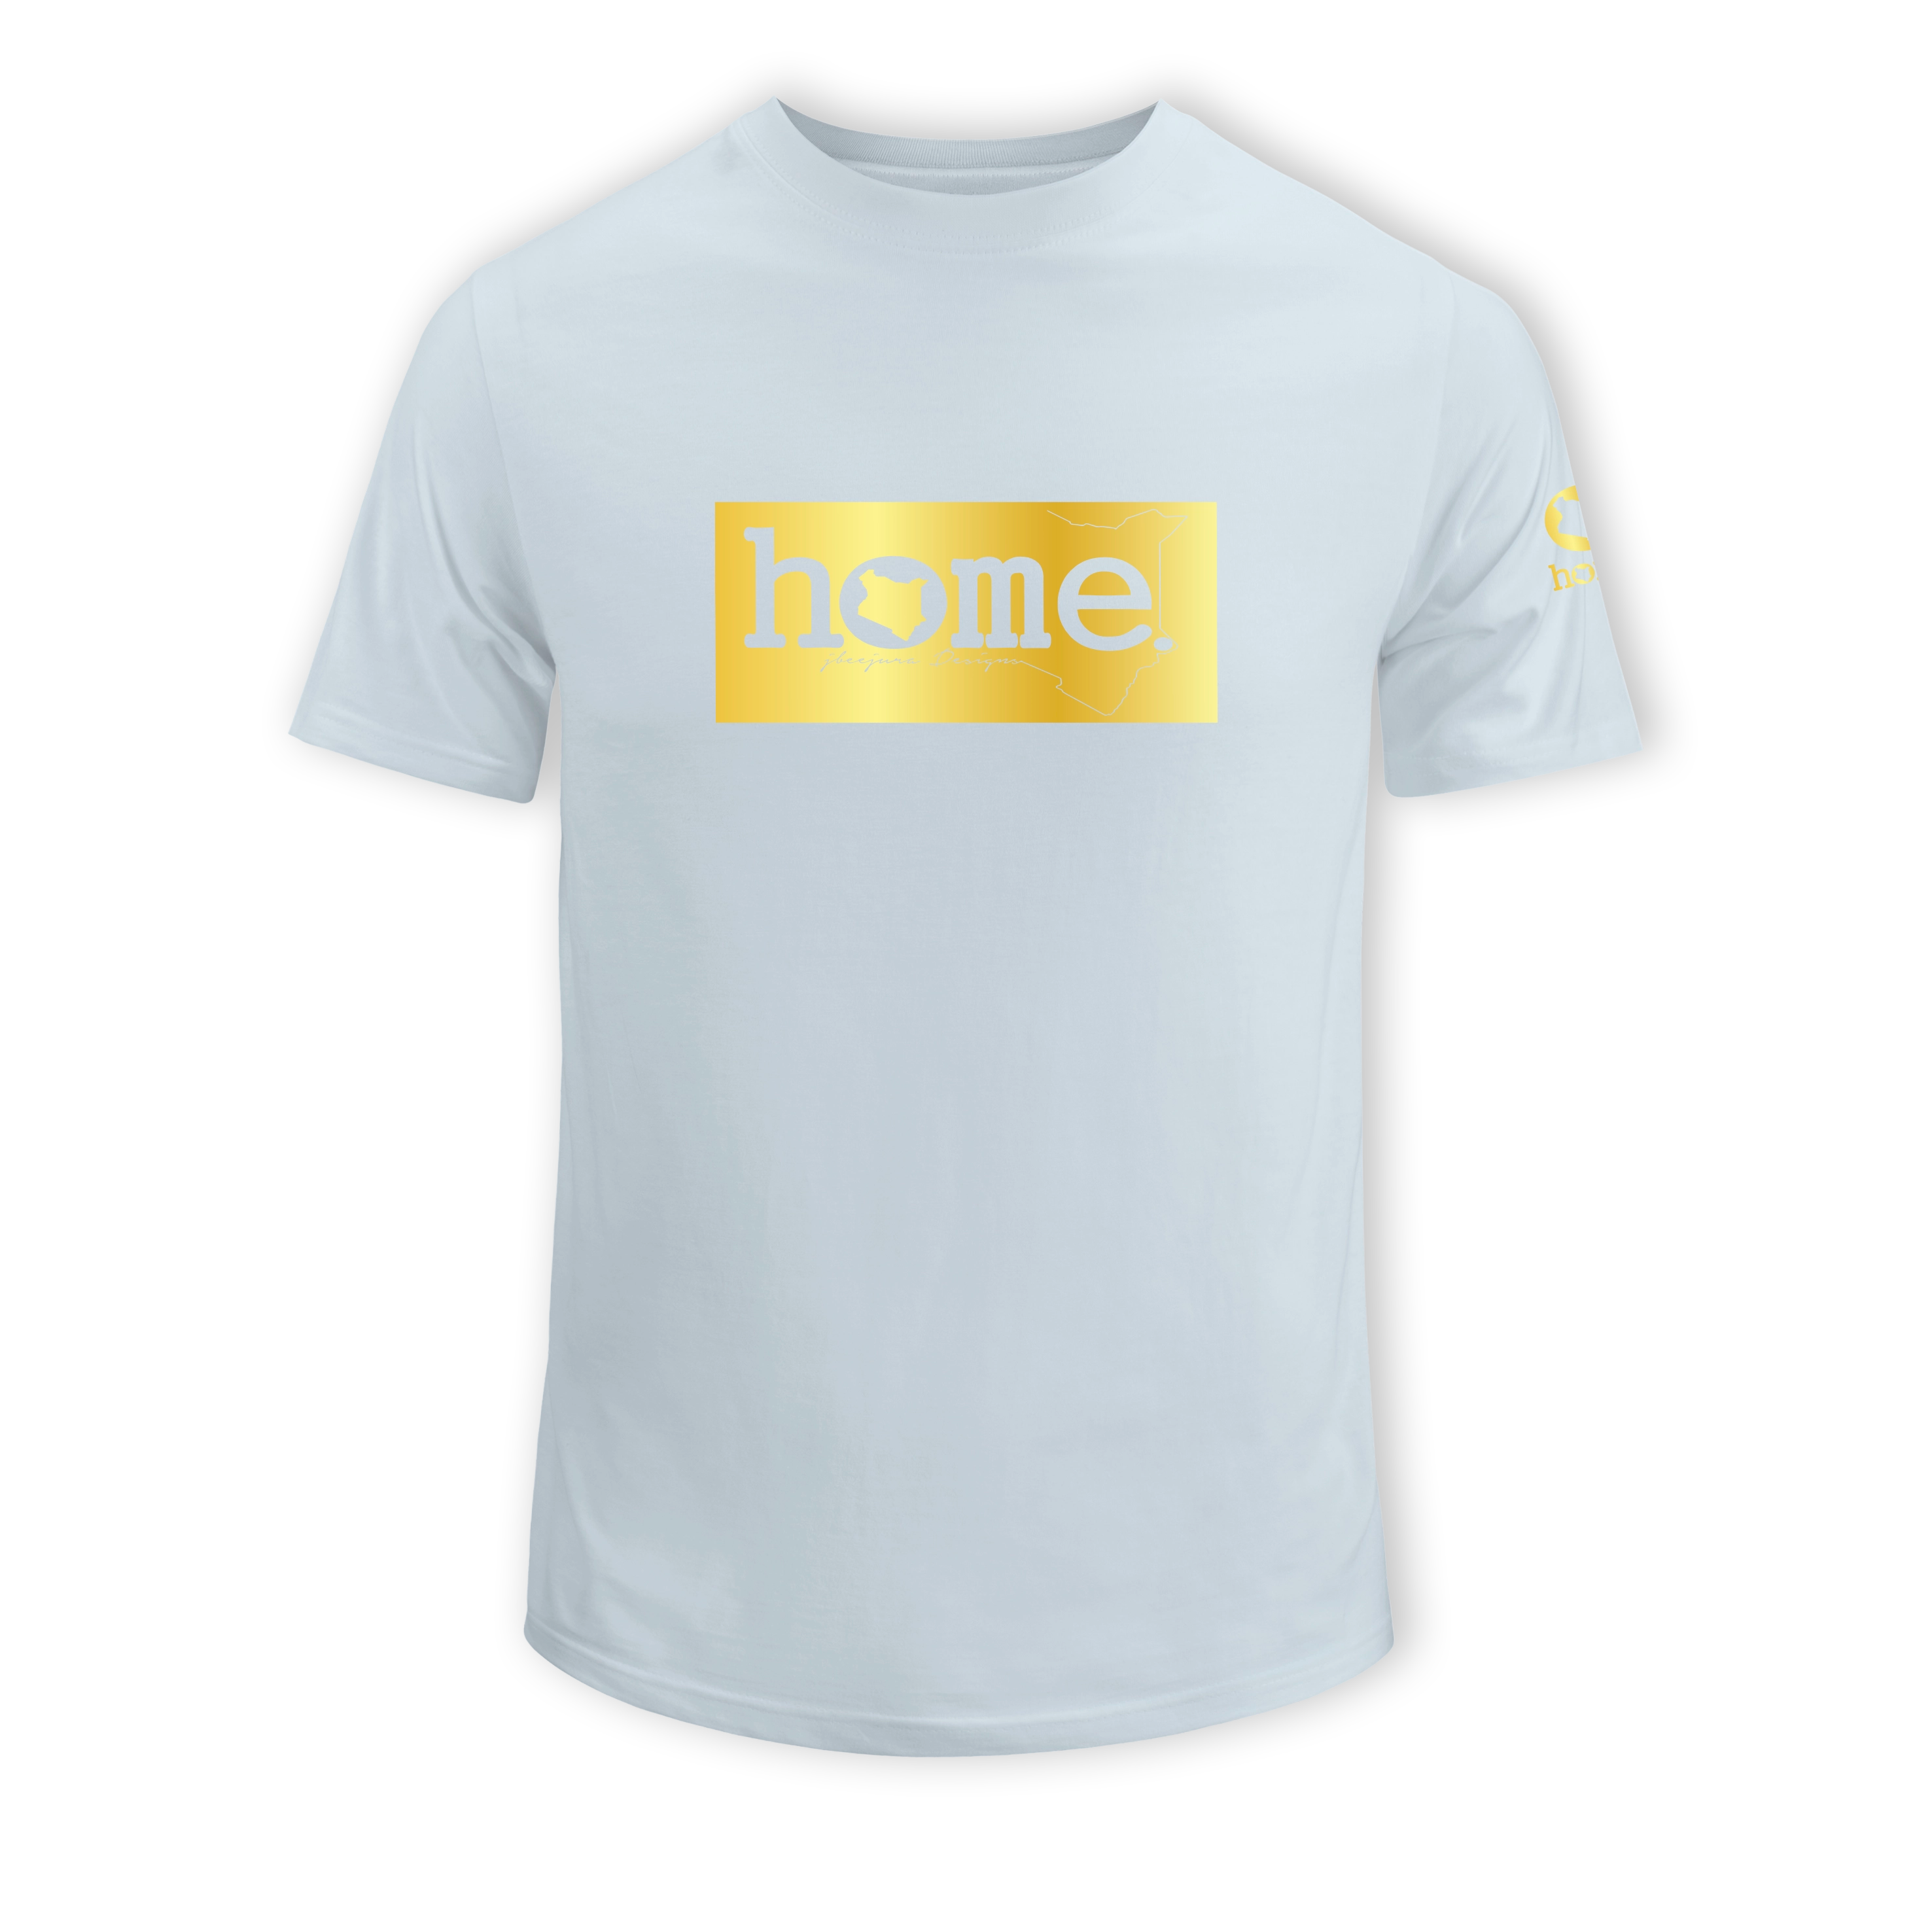 home_254 KIDS SHORT-SLEEVED SKY BLUE T-SHIRT WITH A GOLD CLASSIC PRINT – COTTON PLUS FABRIC